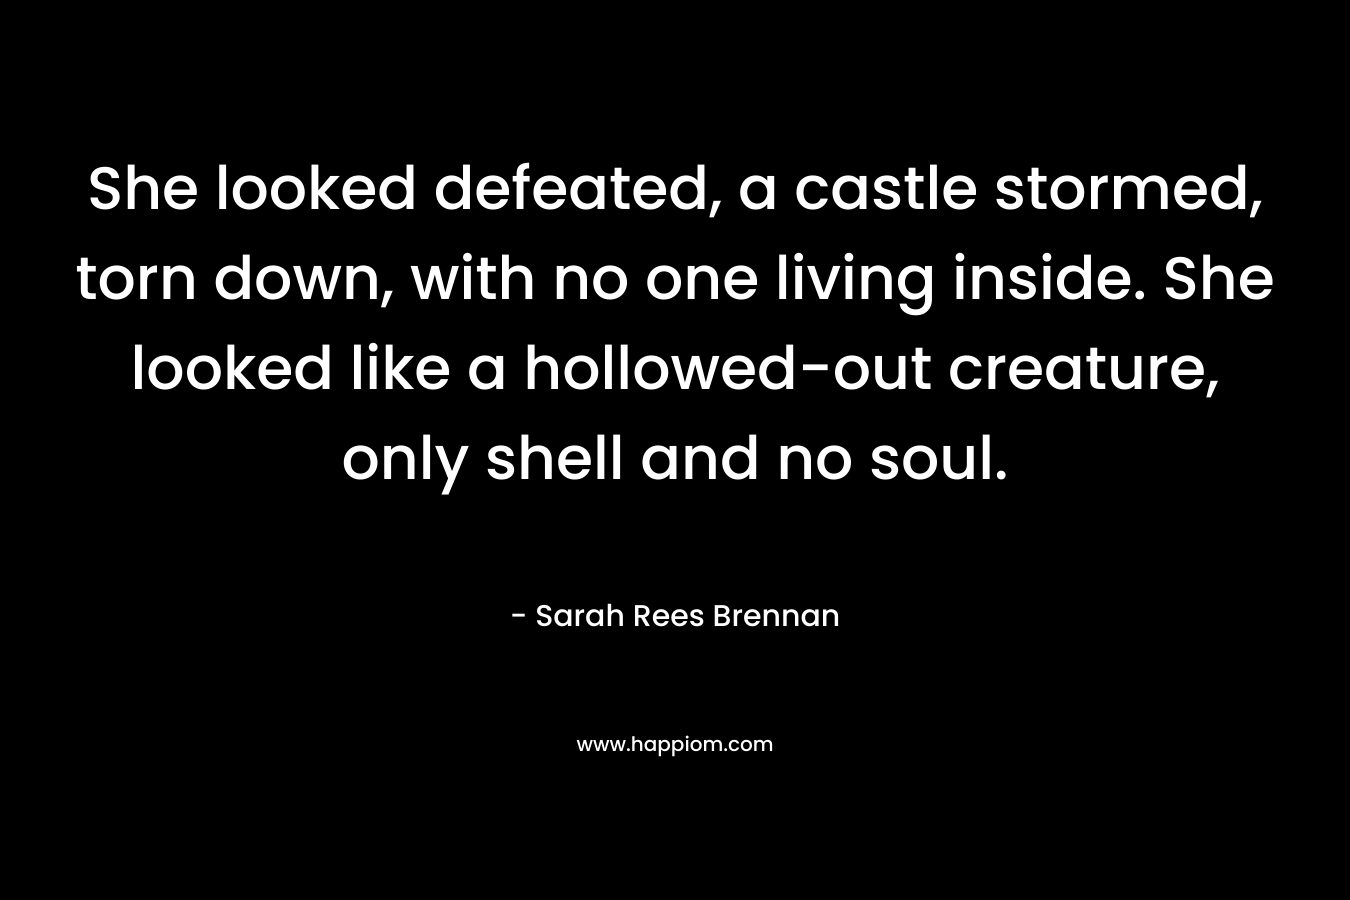 She looked defeated, a castle stormed, torn down, with no one living inside. She looked like a hollowed-out creature, only shell and no soul.